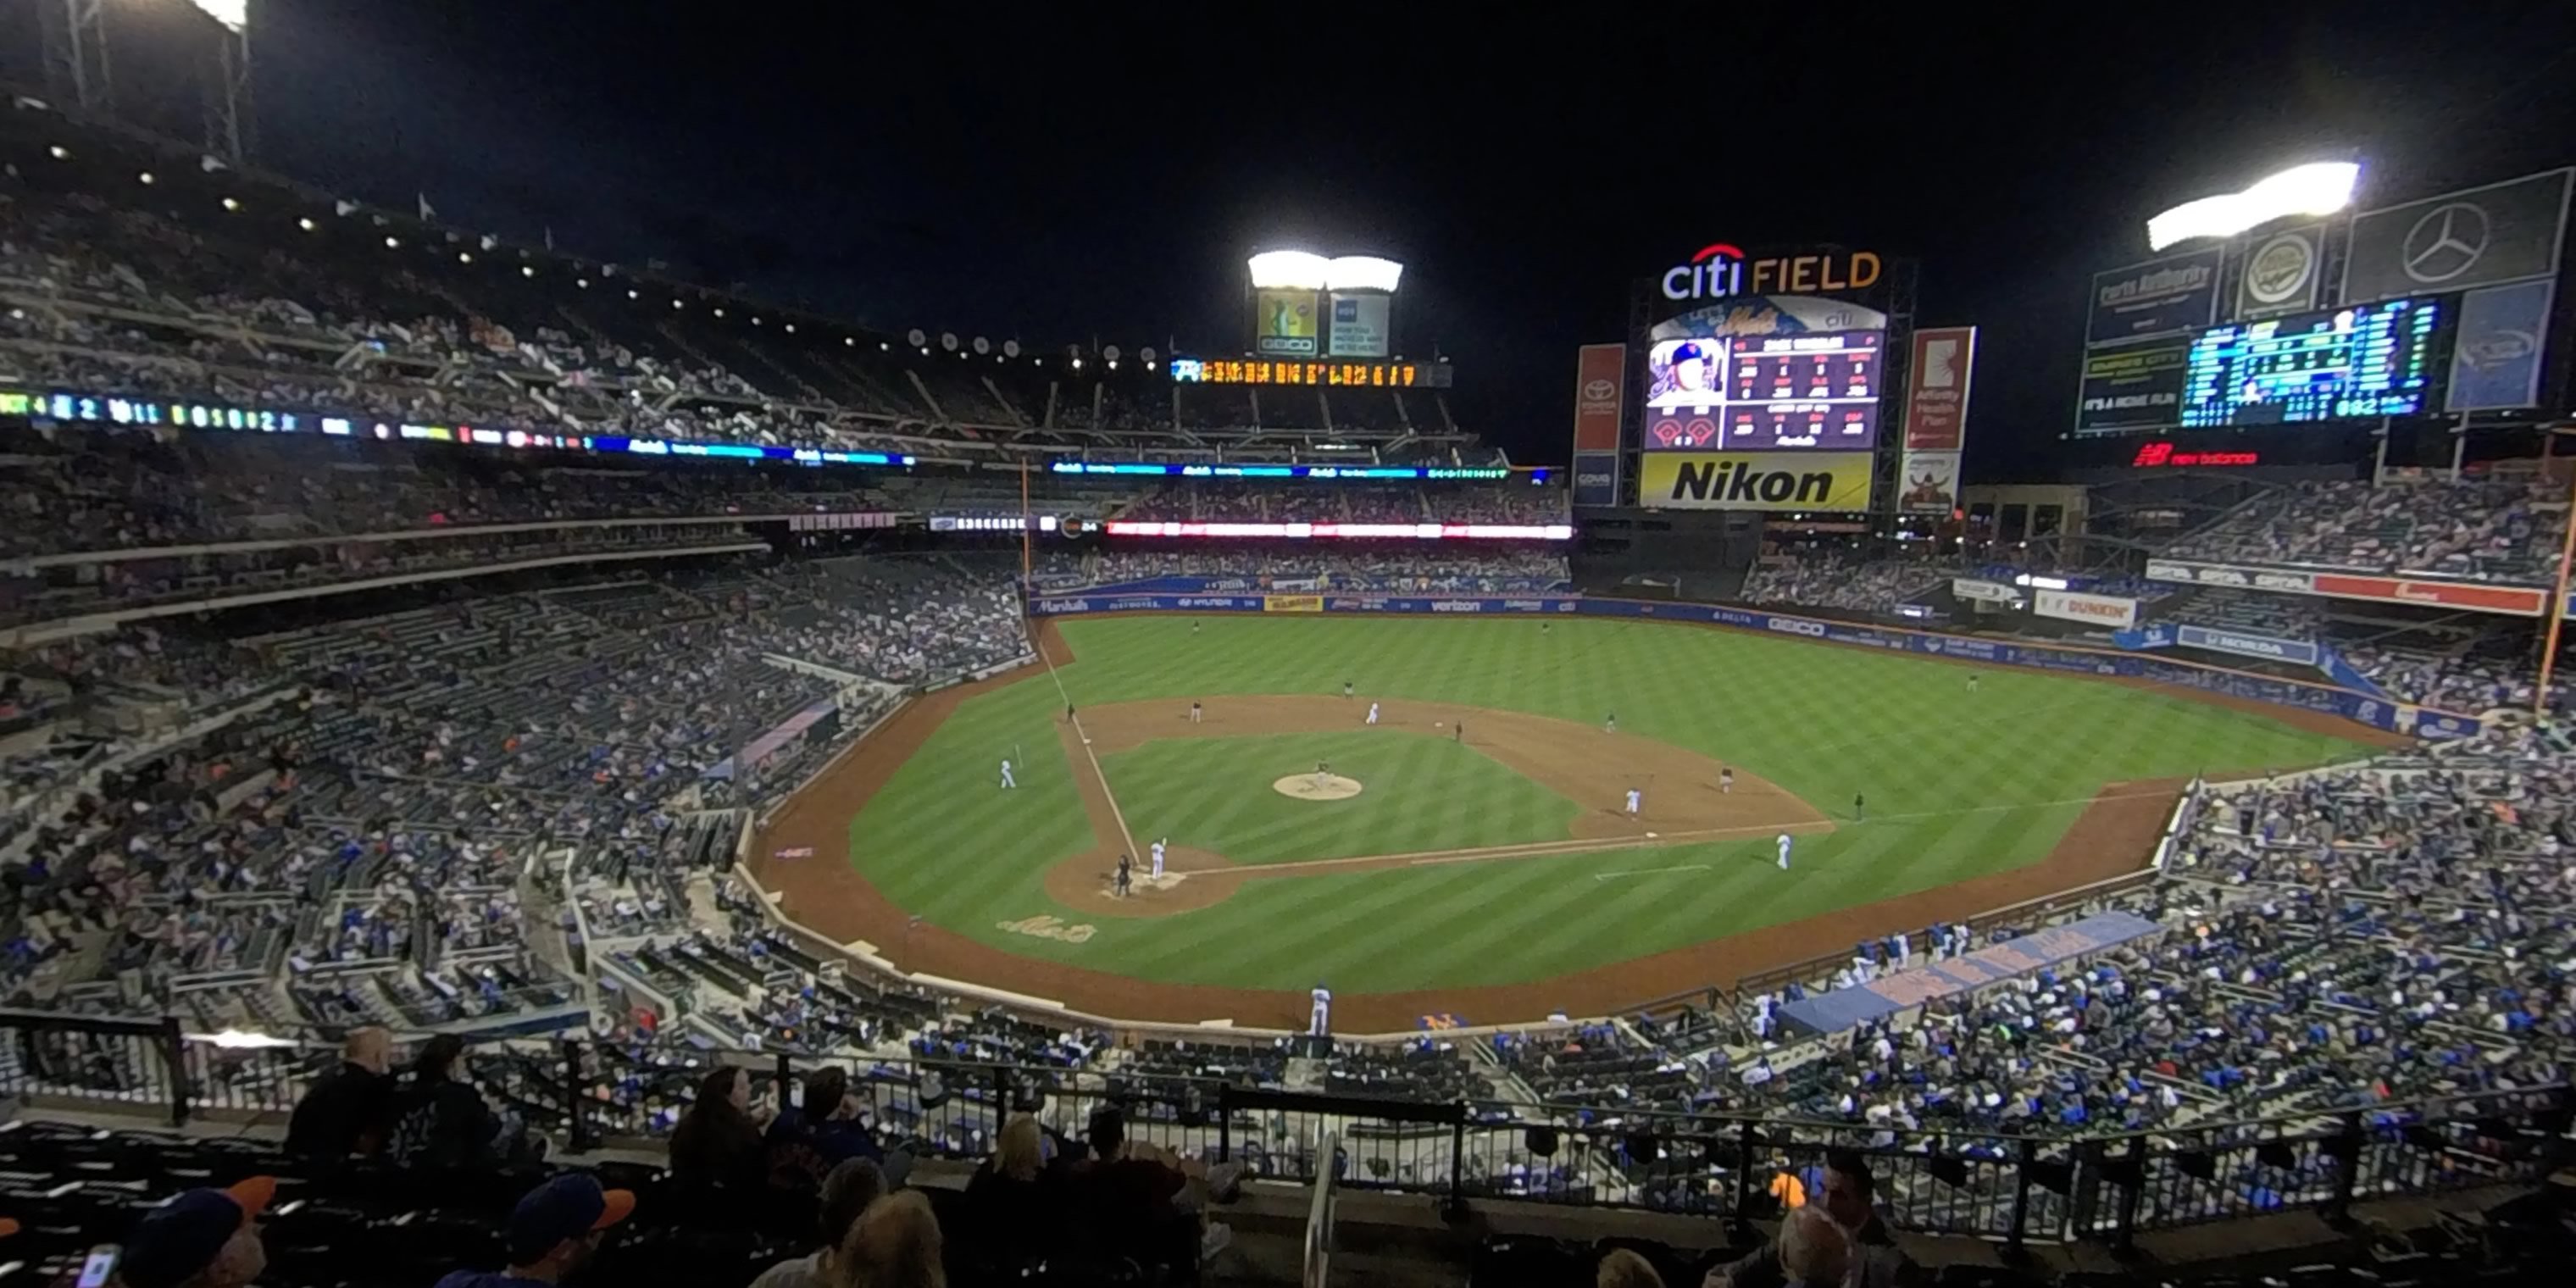 section 315 panoramic seat view  - citi field